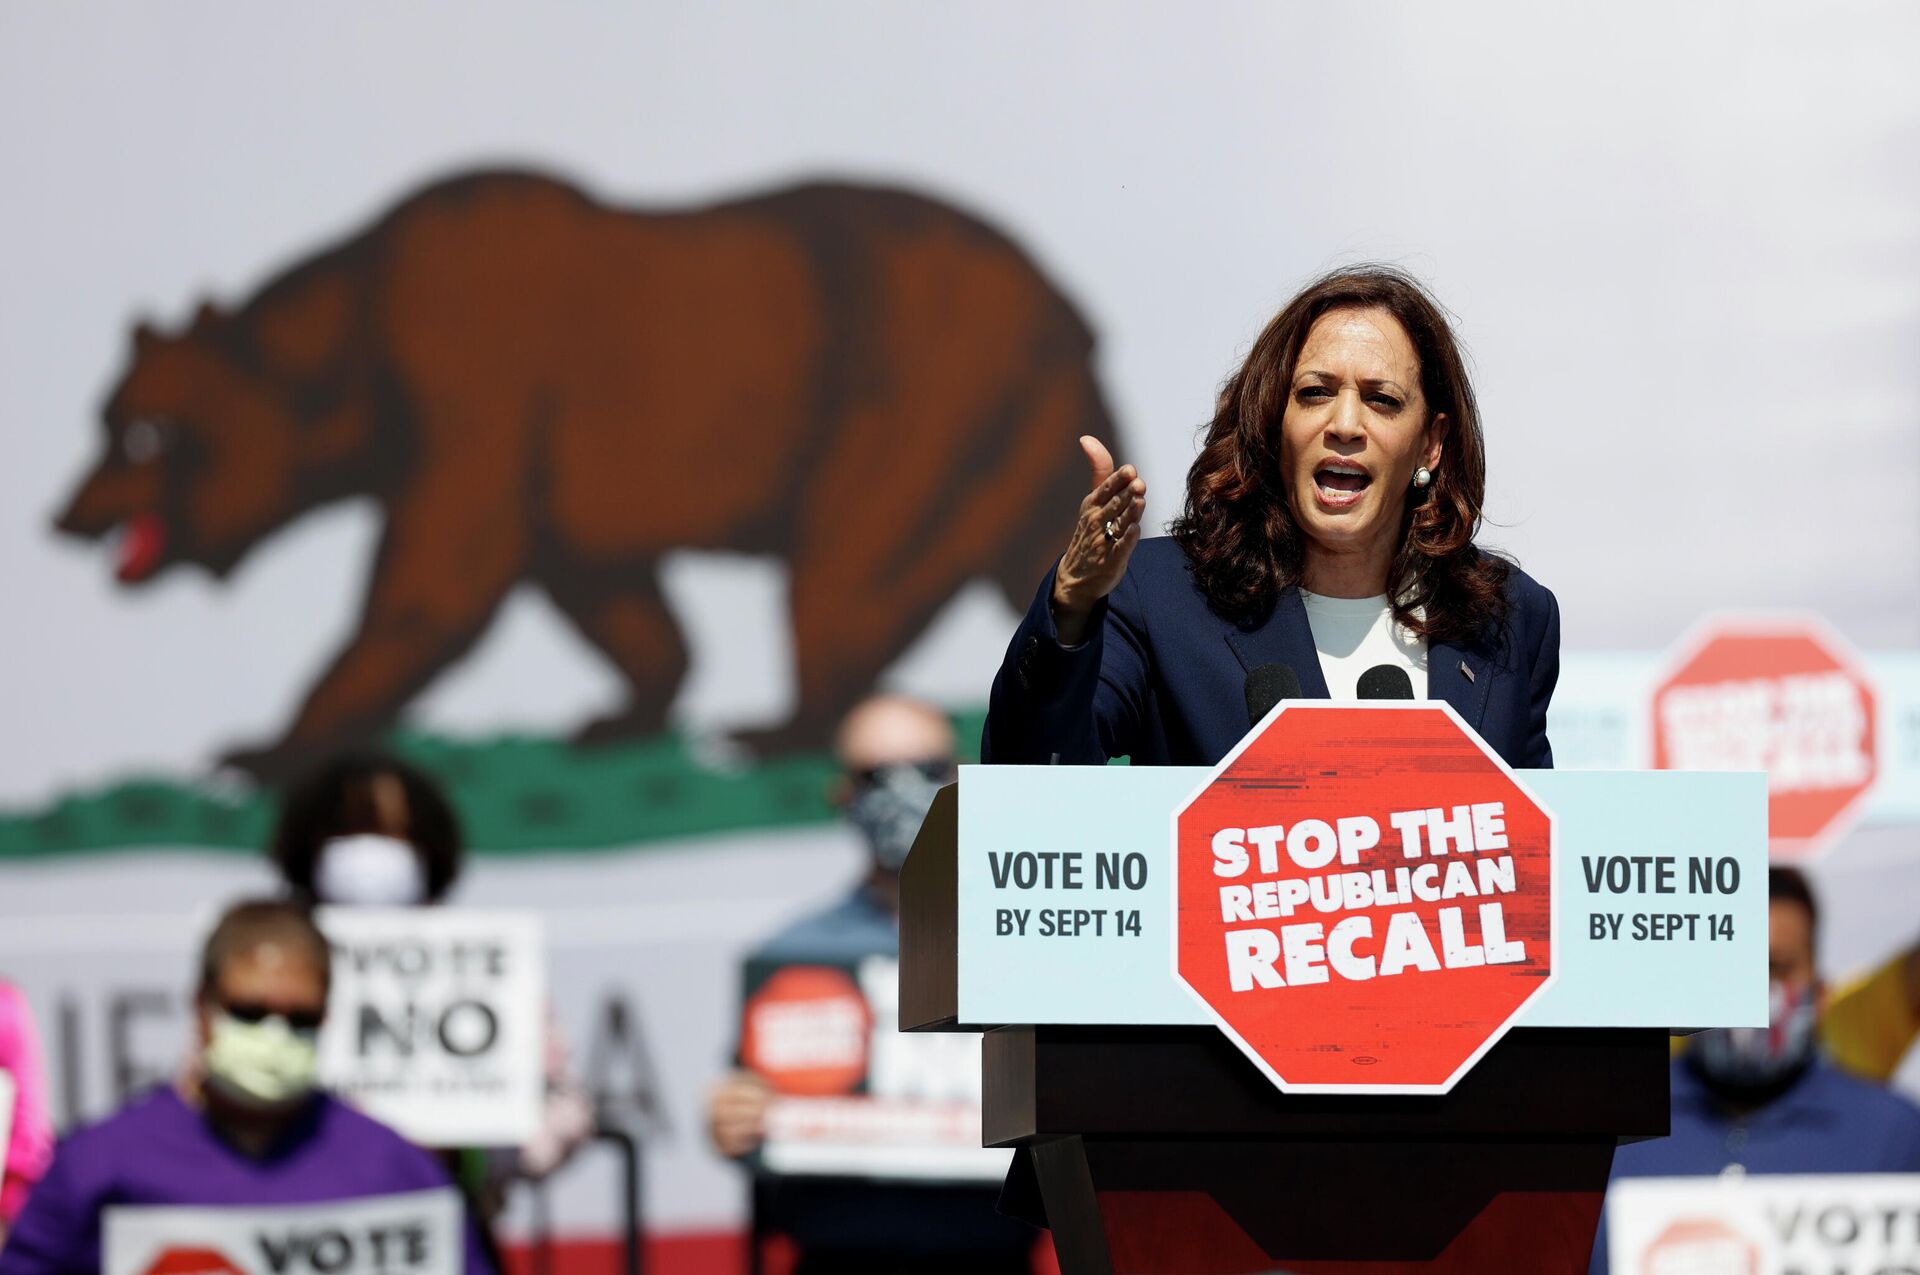 U.S. Vice President Kamala Harris speaks during an appearance with California Governor Gavin Newsom, who is facing a Republican-led recall election in September, in San Leandro, California, U.S., September 8, 2021 - Sputnik International, 1920, 14.09.2021